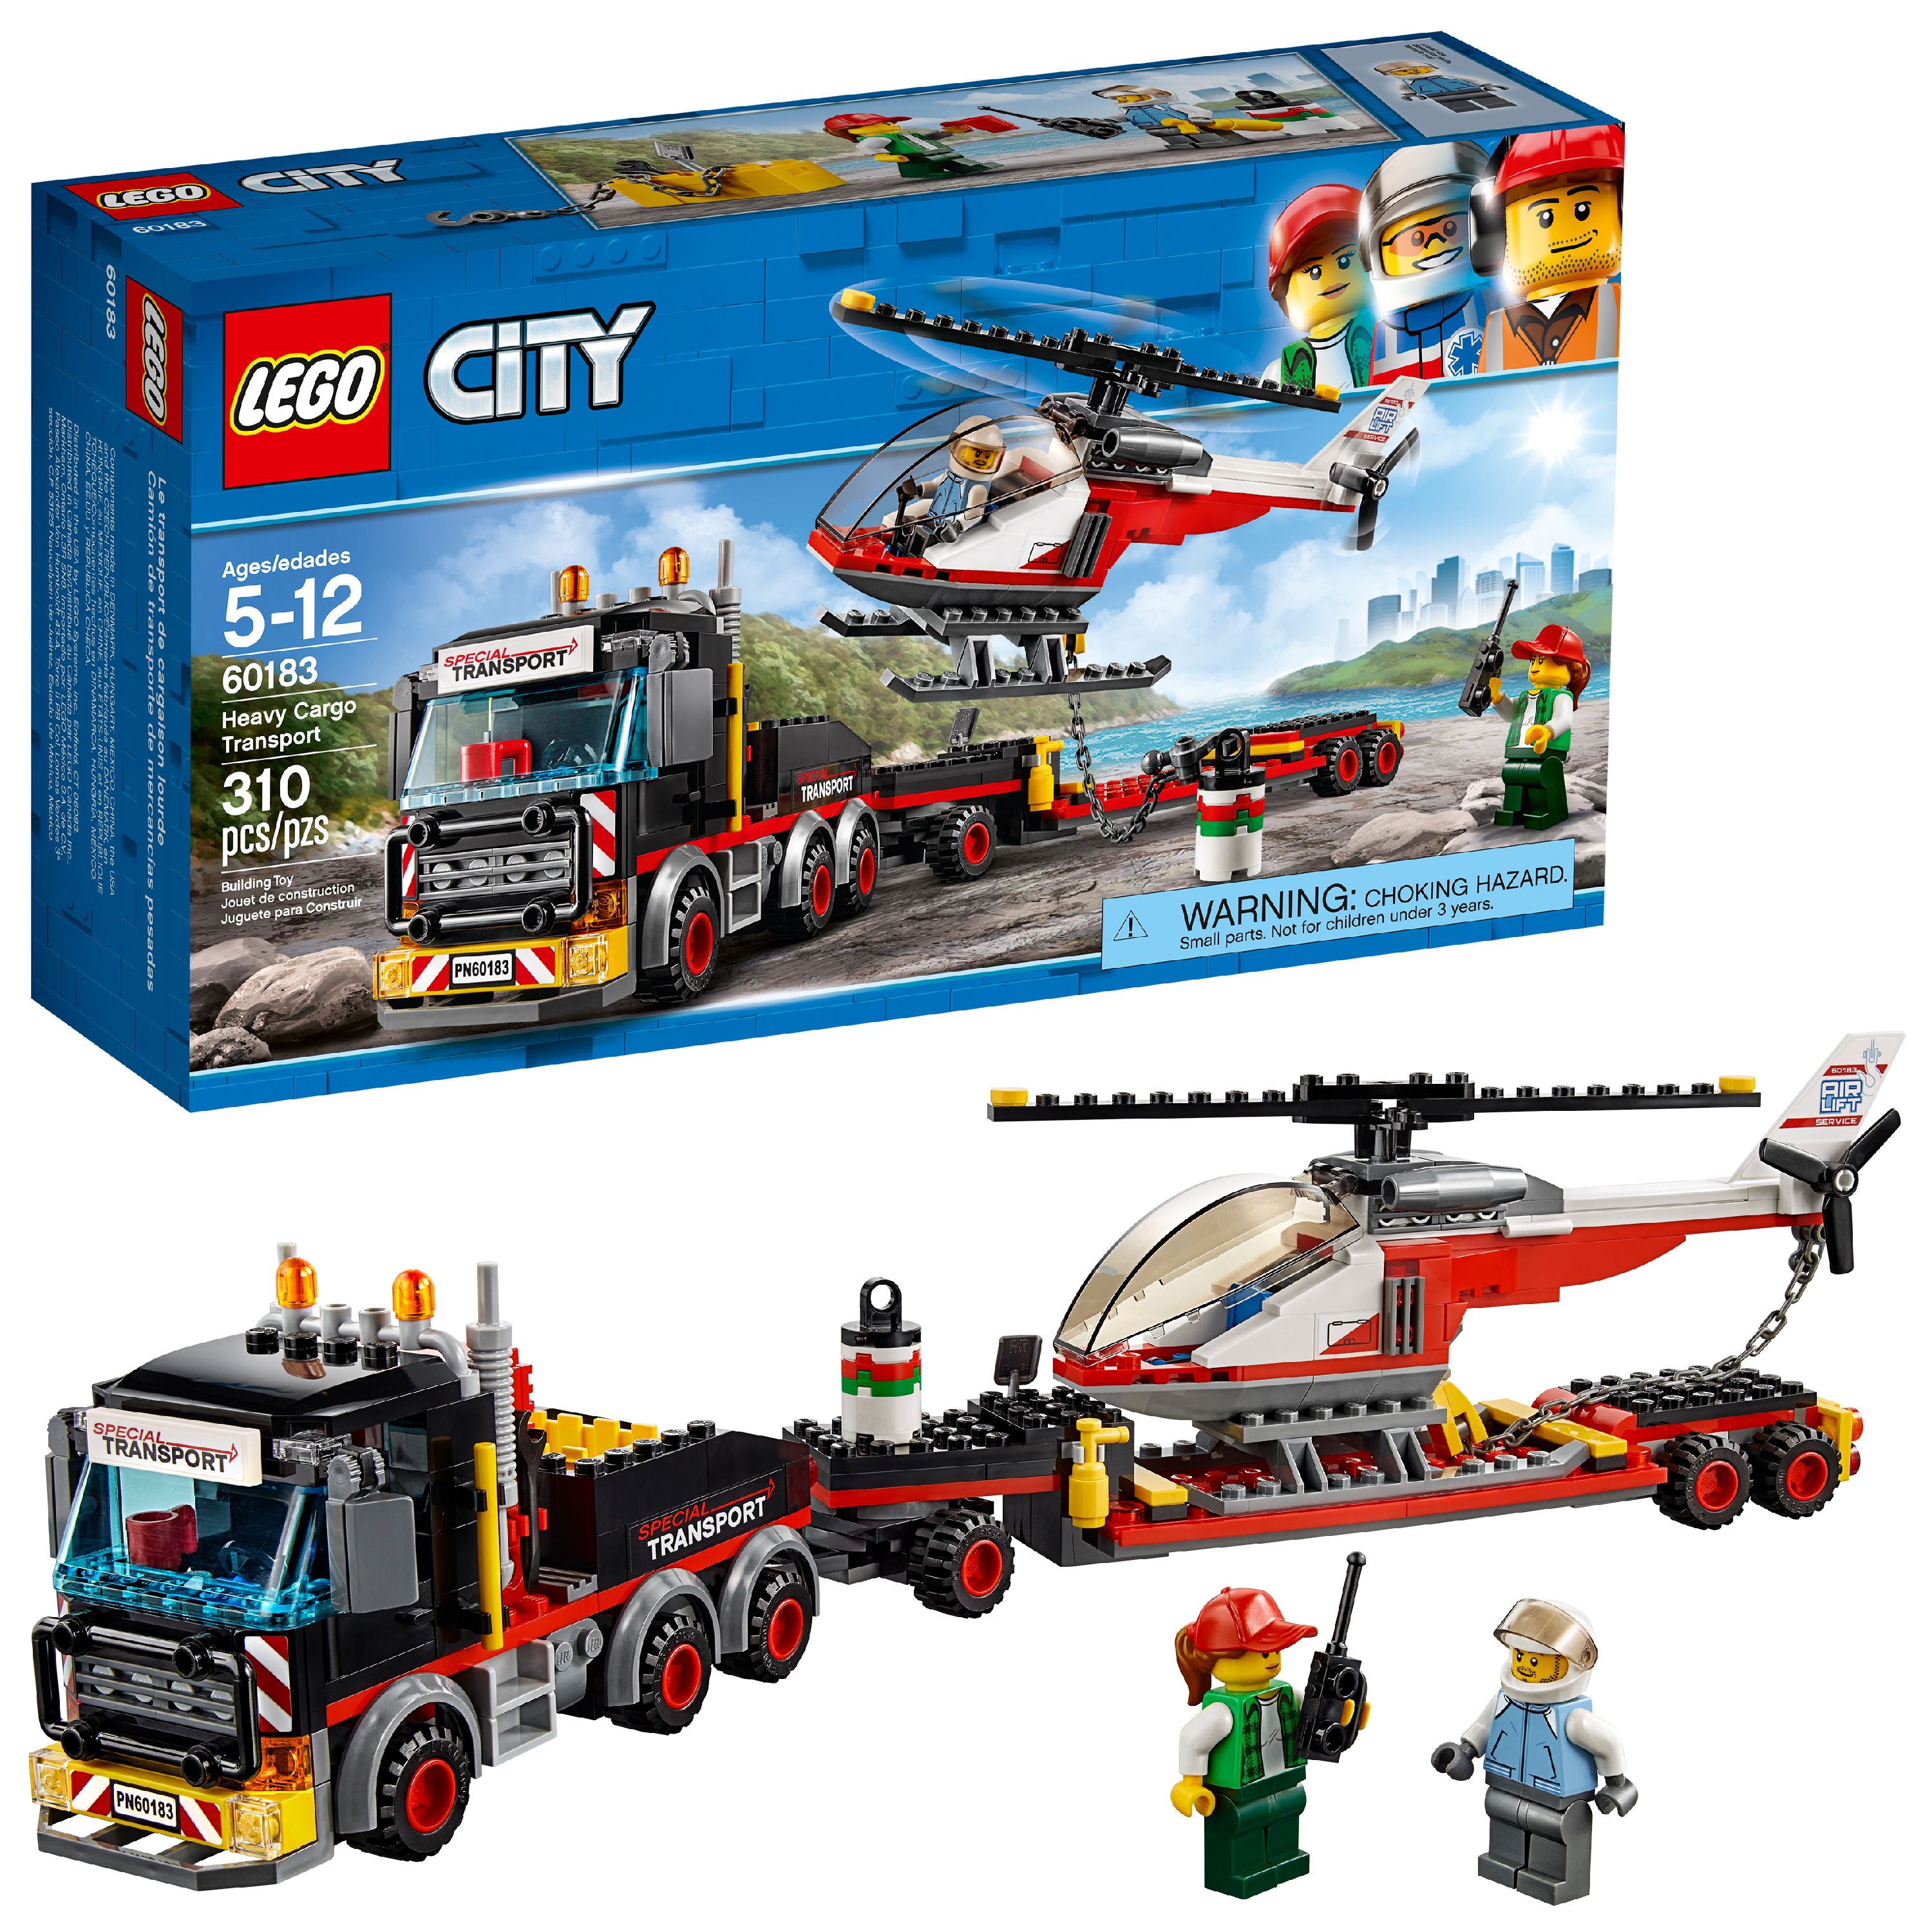 Lego City Heavy Cargo Transport 60183 Toy Truck Building Kit - image 1 of 7